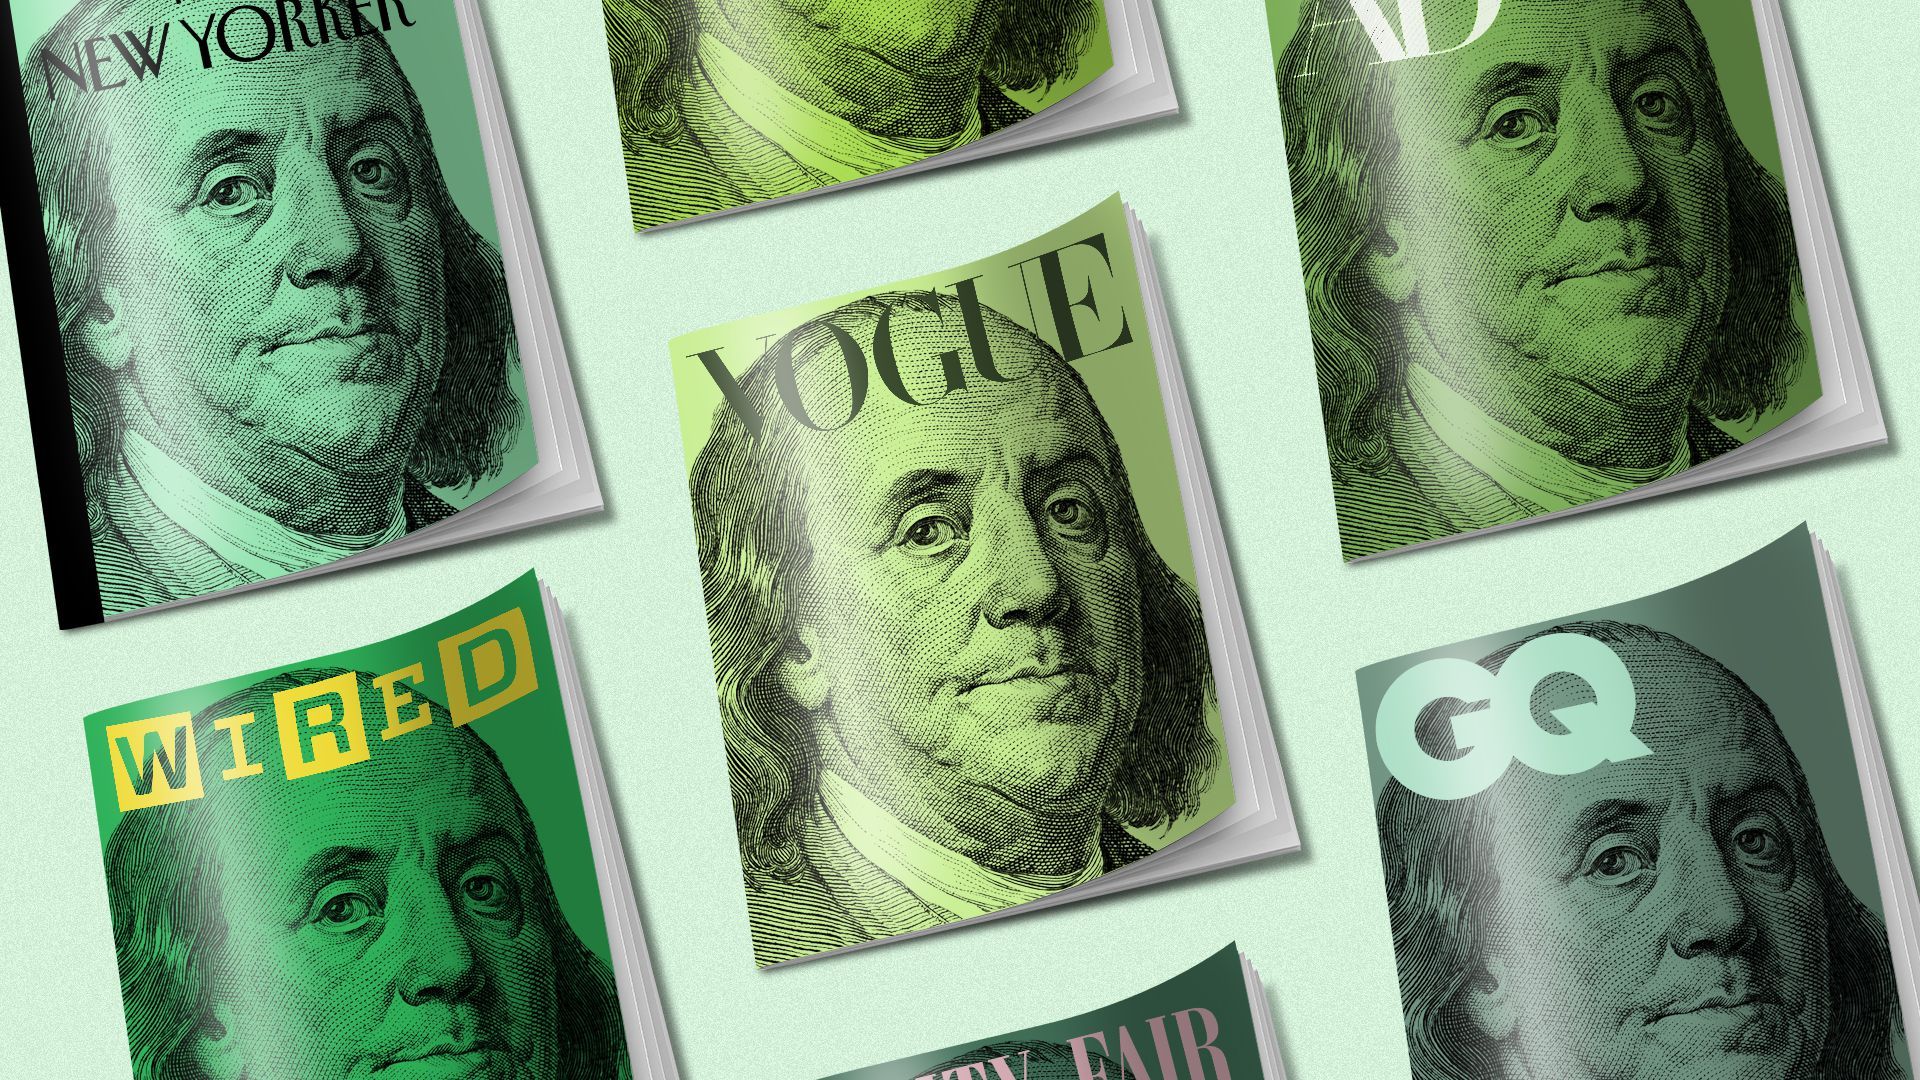 Illustration of Condé Nast magazines with Ben Franklin on the cover